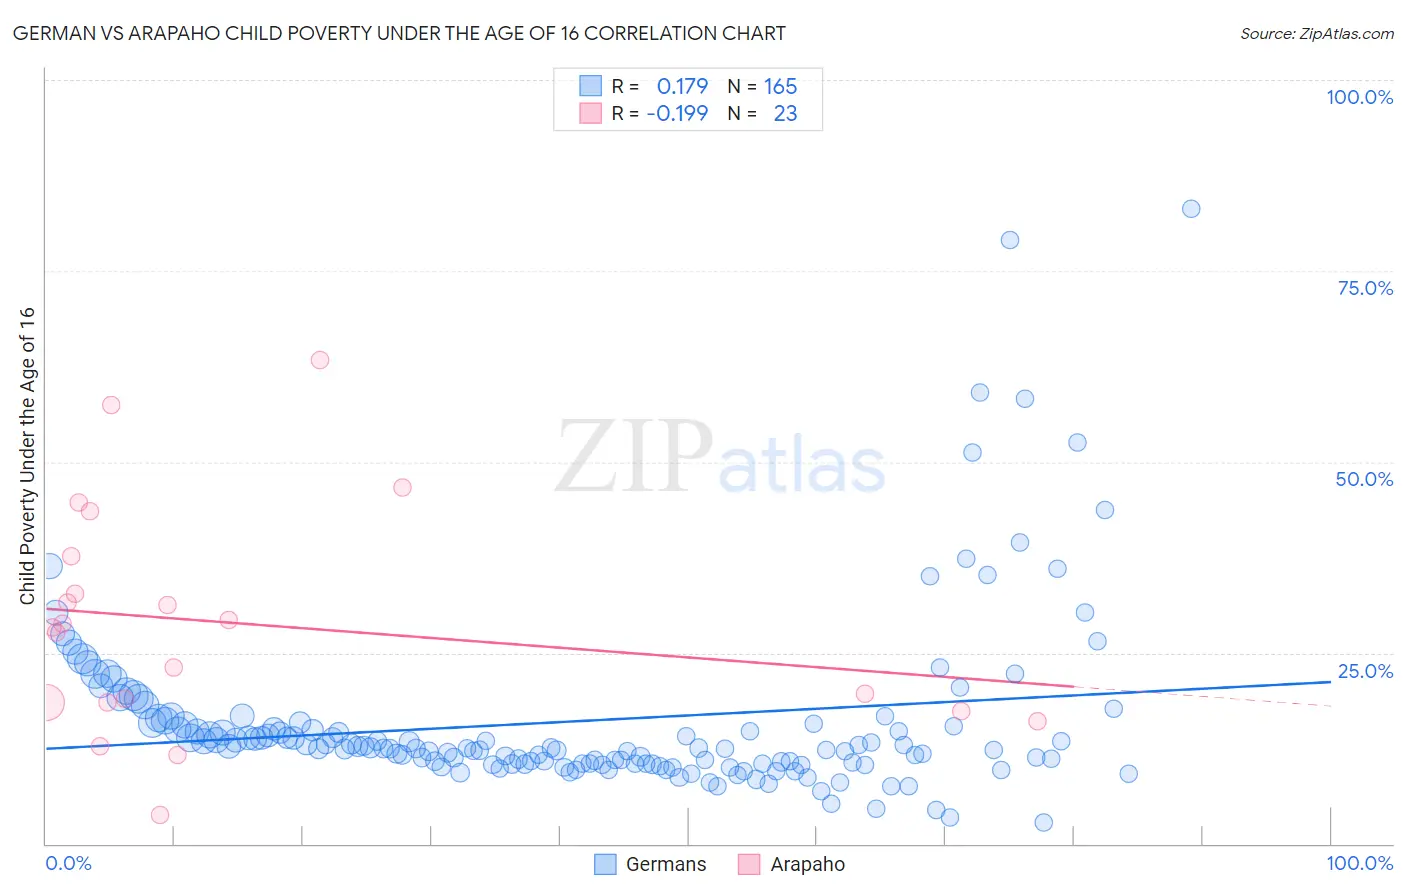 German vs Arapaho Child Poverty Under the Age of 16